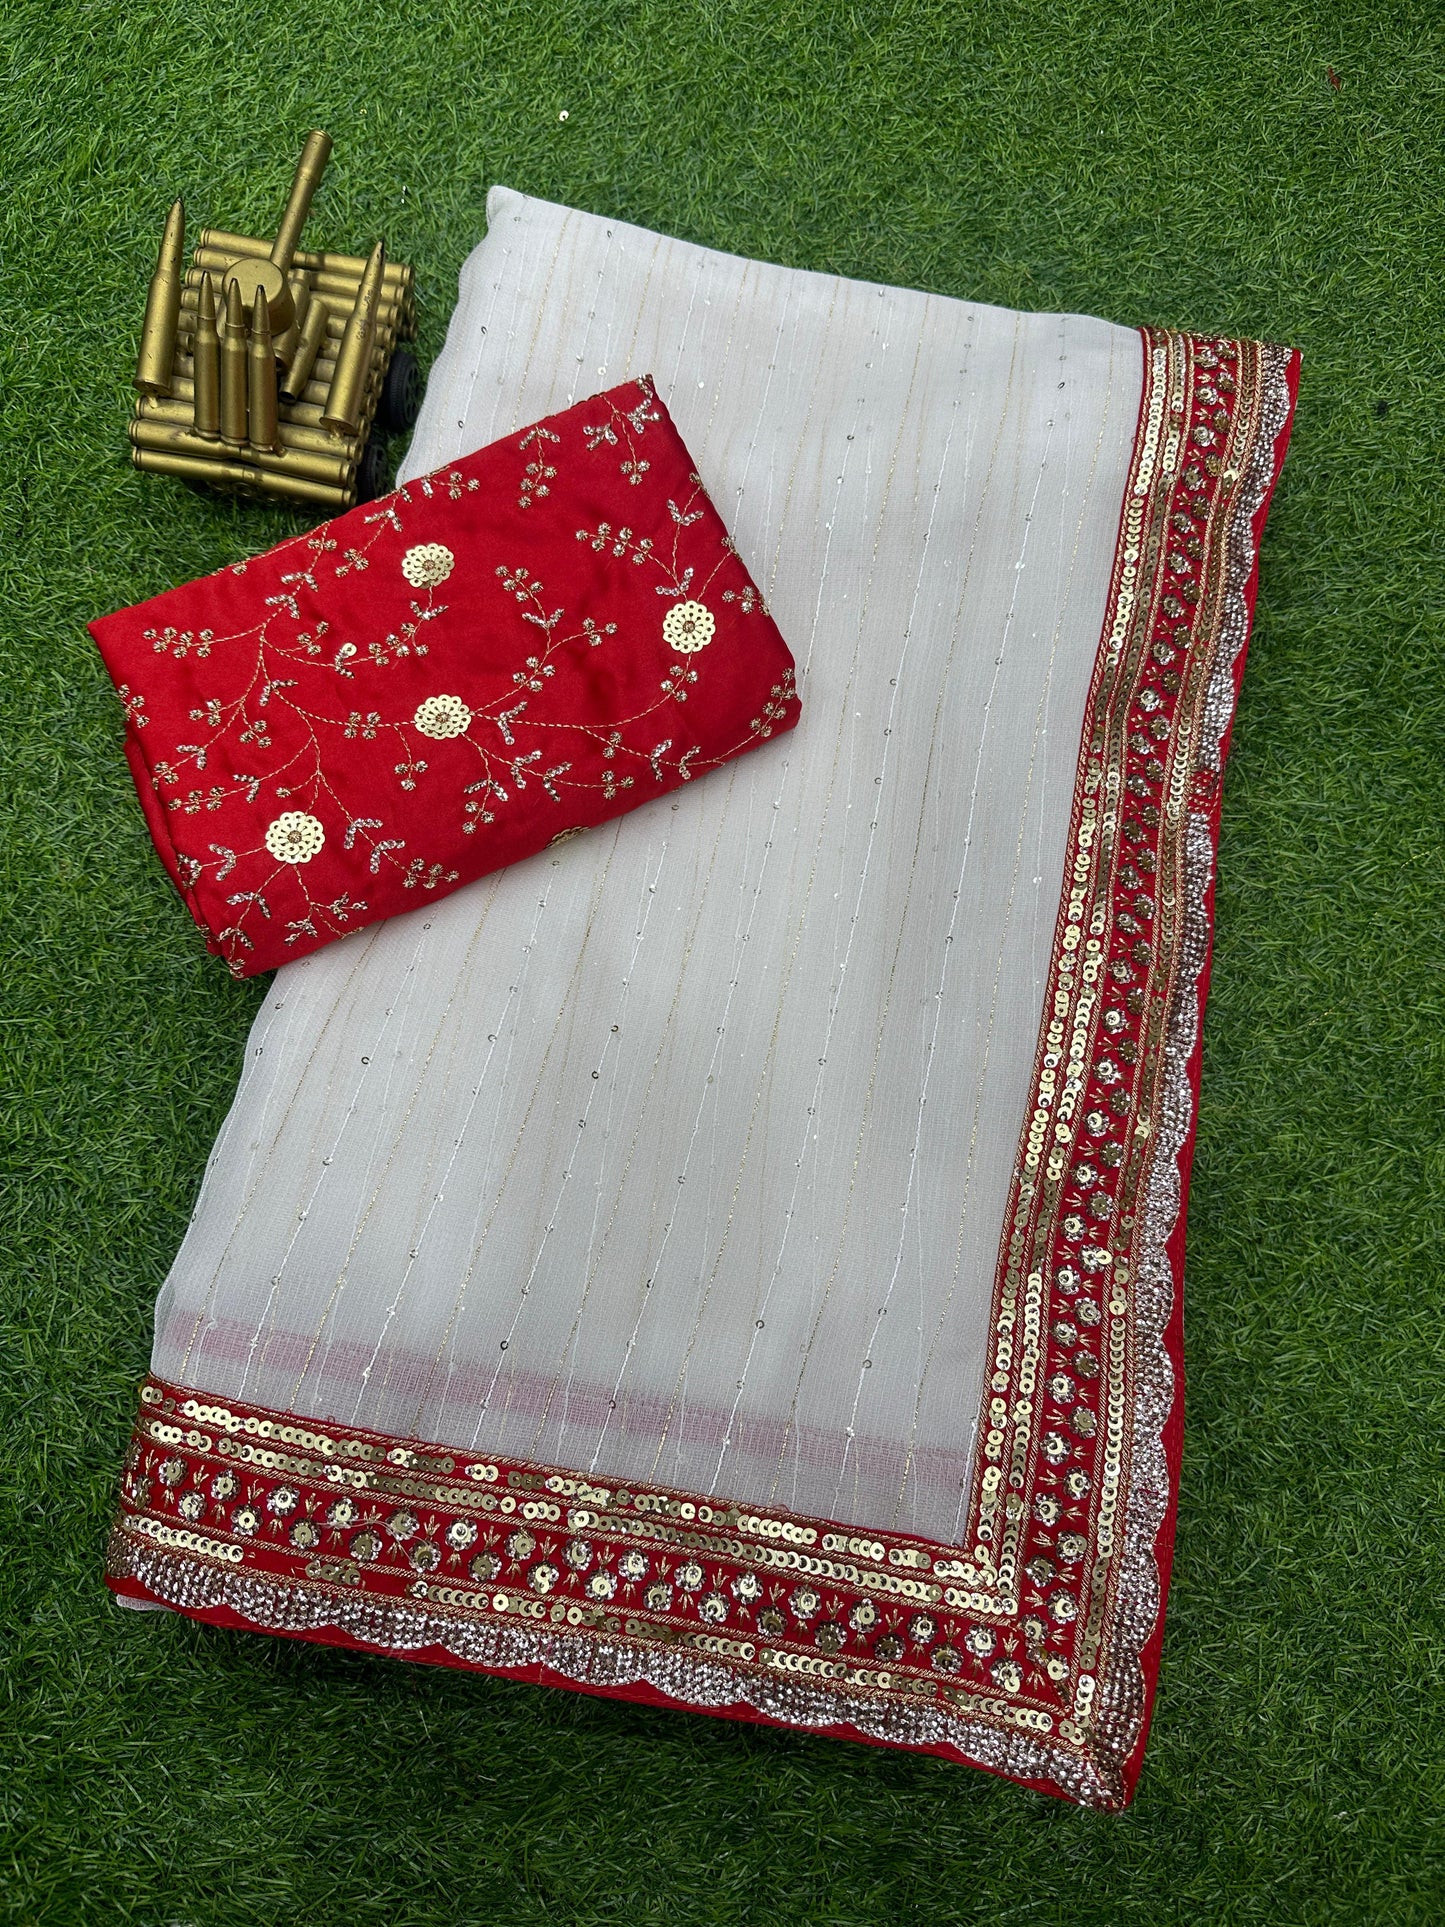 Self sequin weaving saree with contrast red colour sequin work boder.